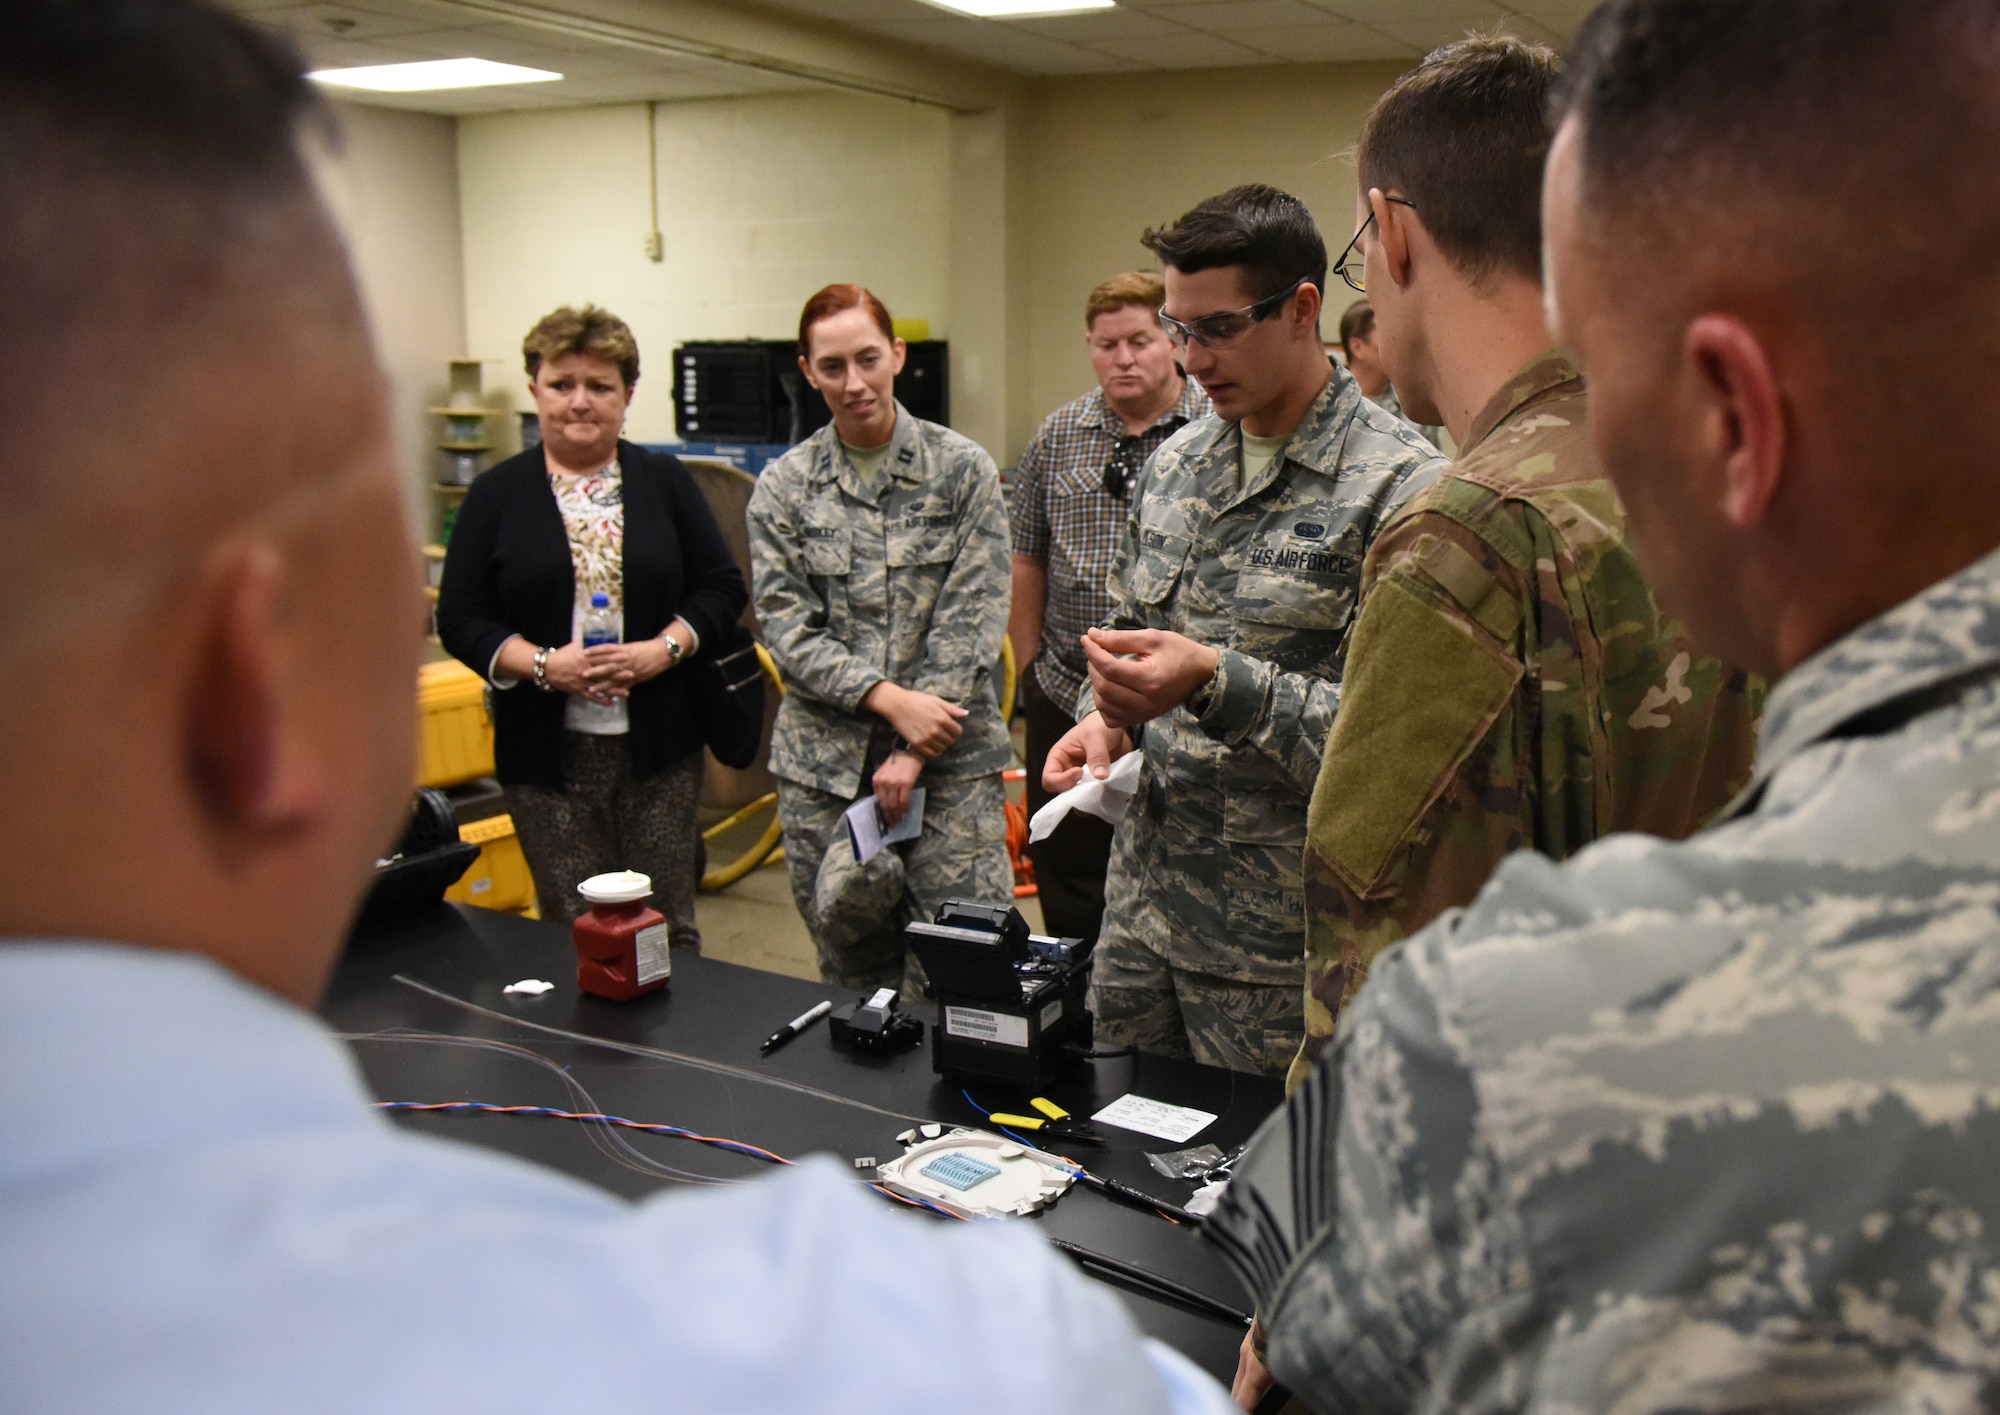 U.S. Air Force Airman Trent Olson, 85th Engineering Installation Squadron cable and antenna systems technician, conducts a cable splicing demonstration during an open house inside Maltby Hall at Keesler Air Force Base, Mississippi, Oct. 11, 2018. Keesler leadership and personnel attended the event to become more familiar with the 85th EIS mission capabilities. (U.S. Air Force photo by Kemberly Groue)